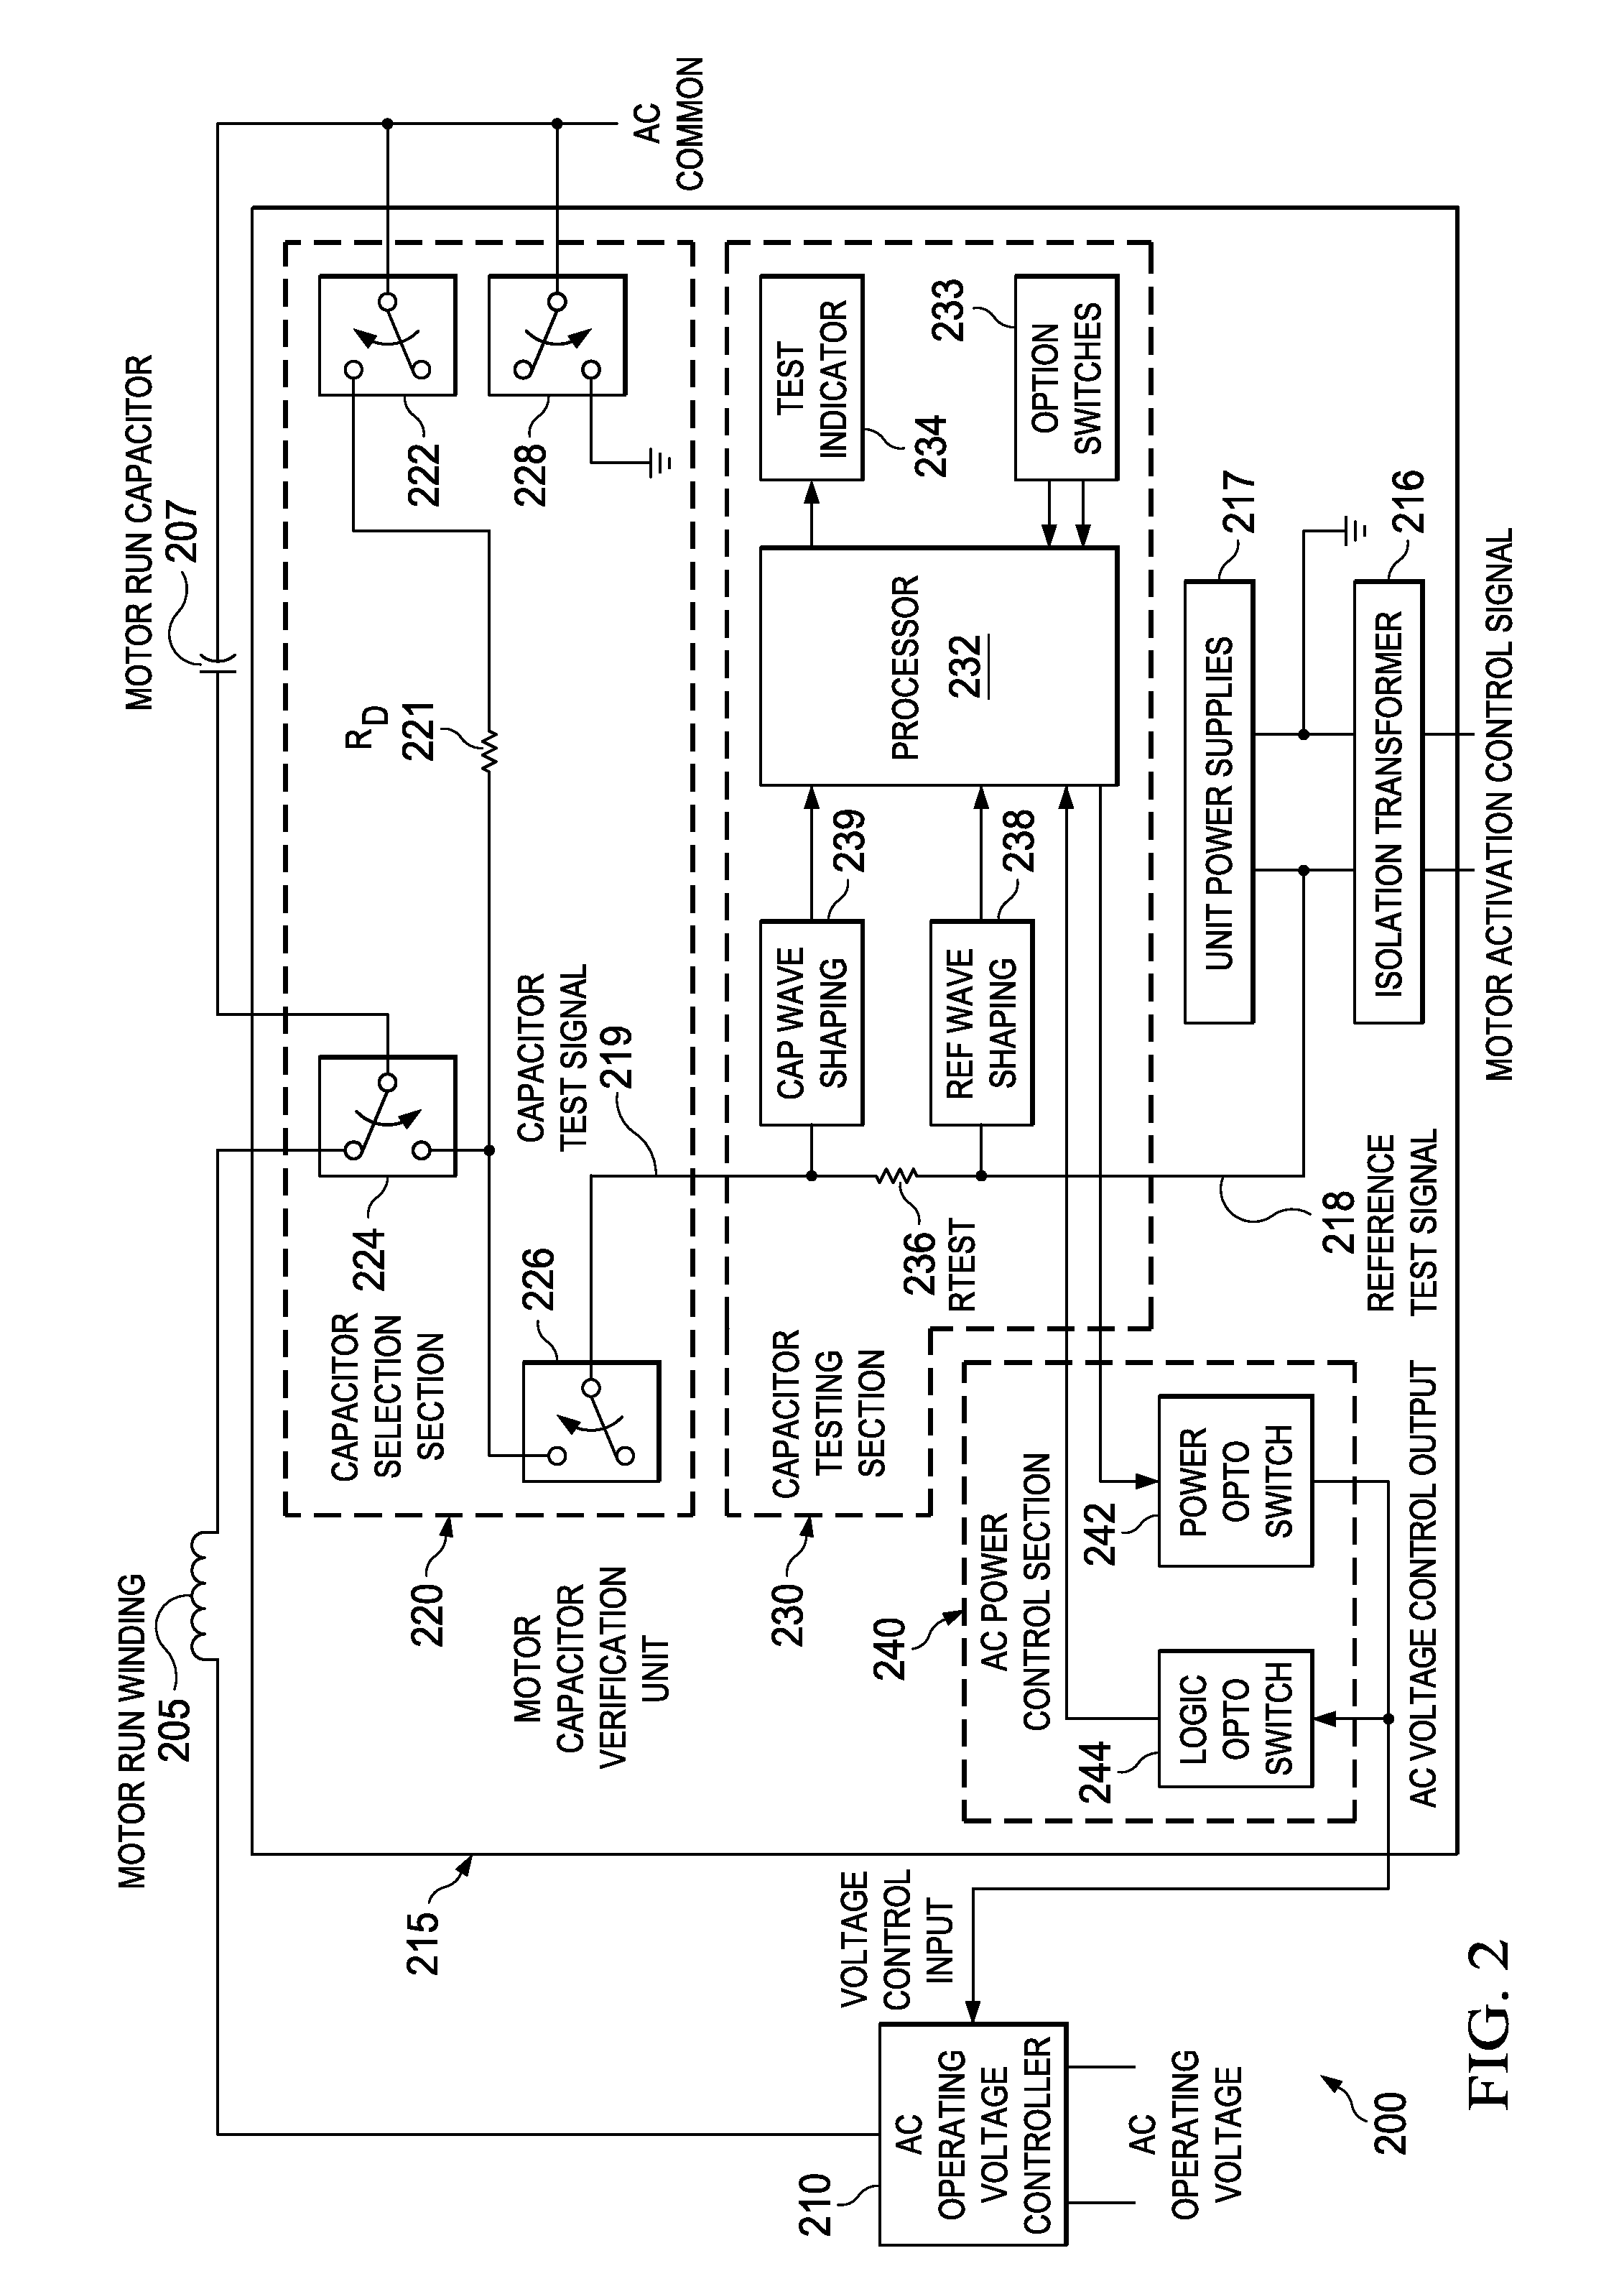 Automated Verification Testing for a Motor Capacitor